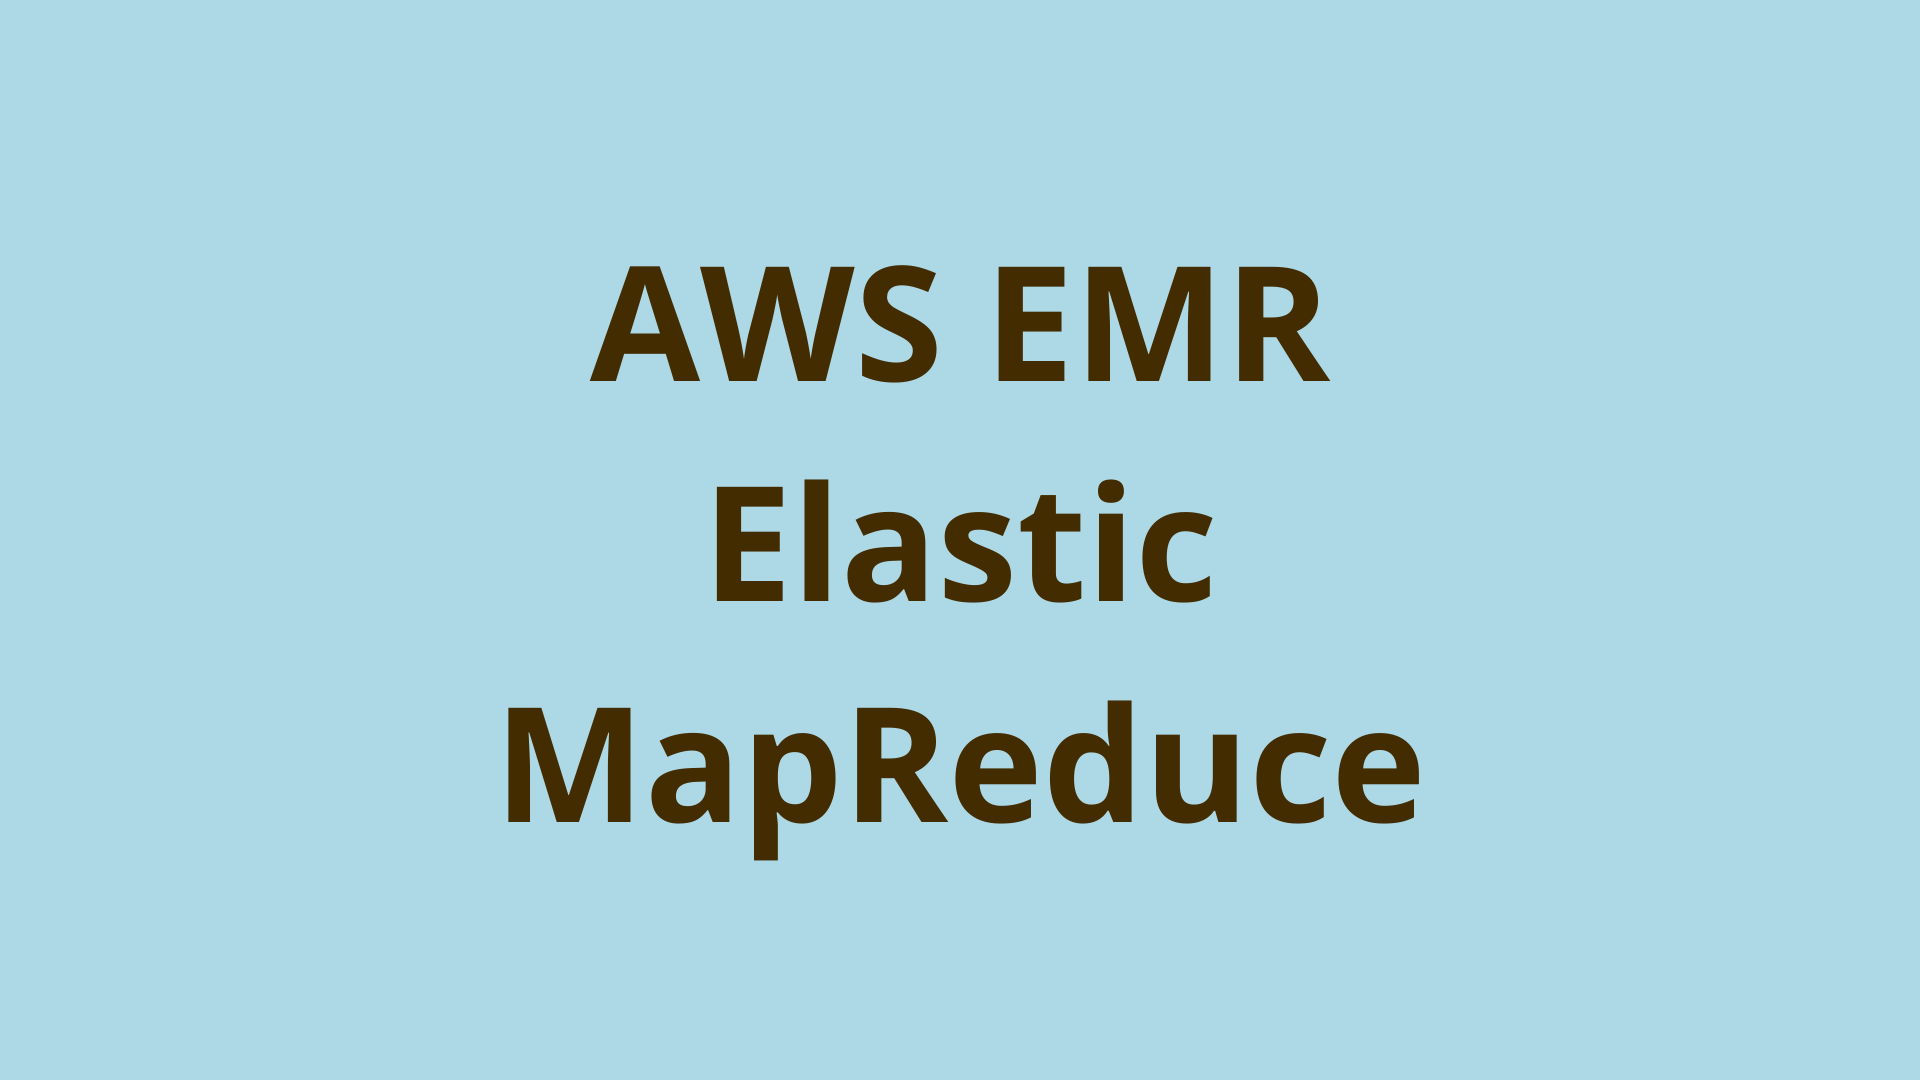 Image of AWS EMR - A Gentle Introduction to AWS Elastic MapReduce